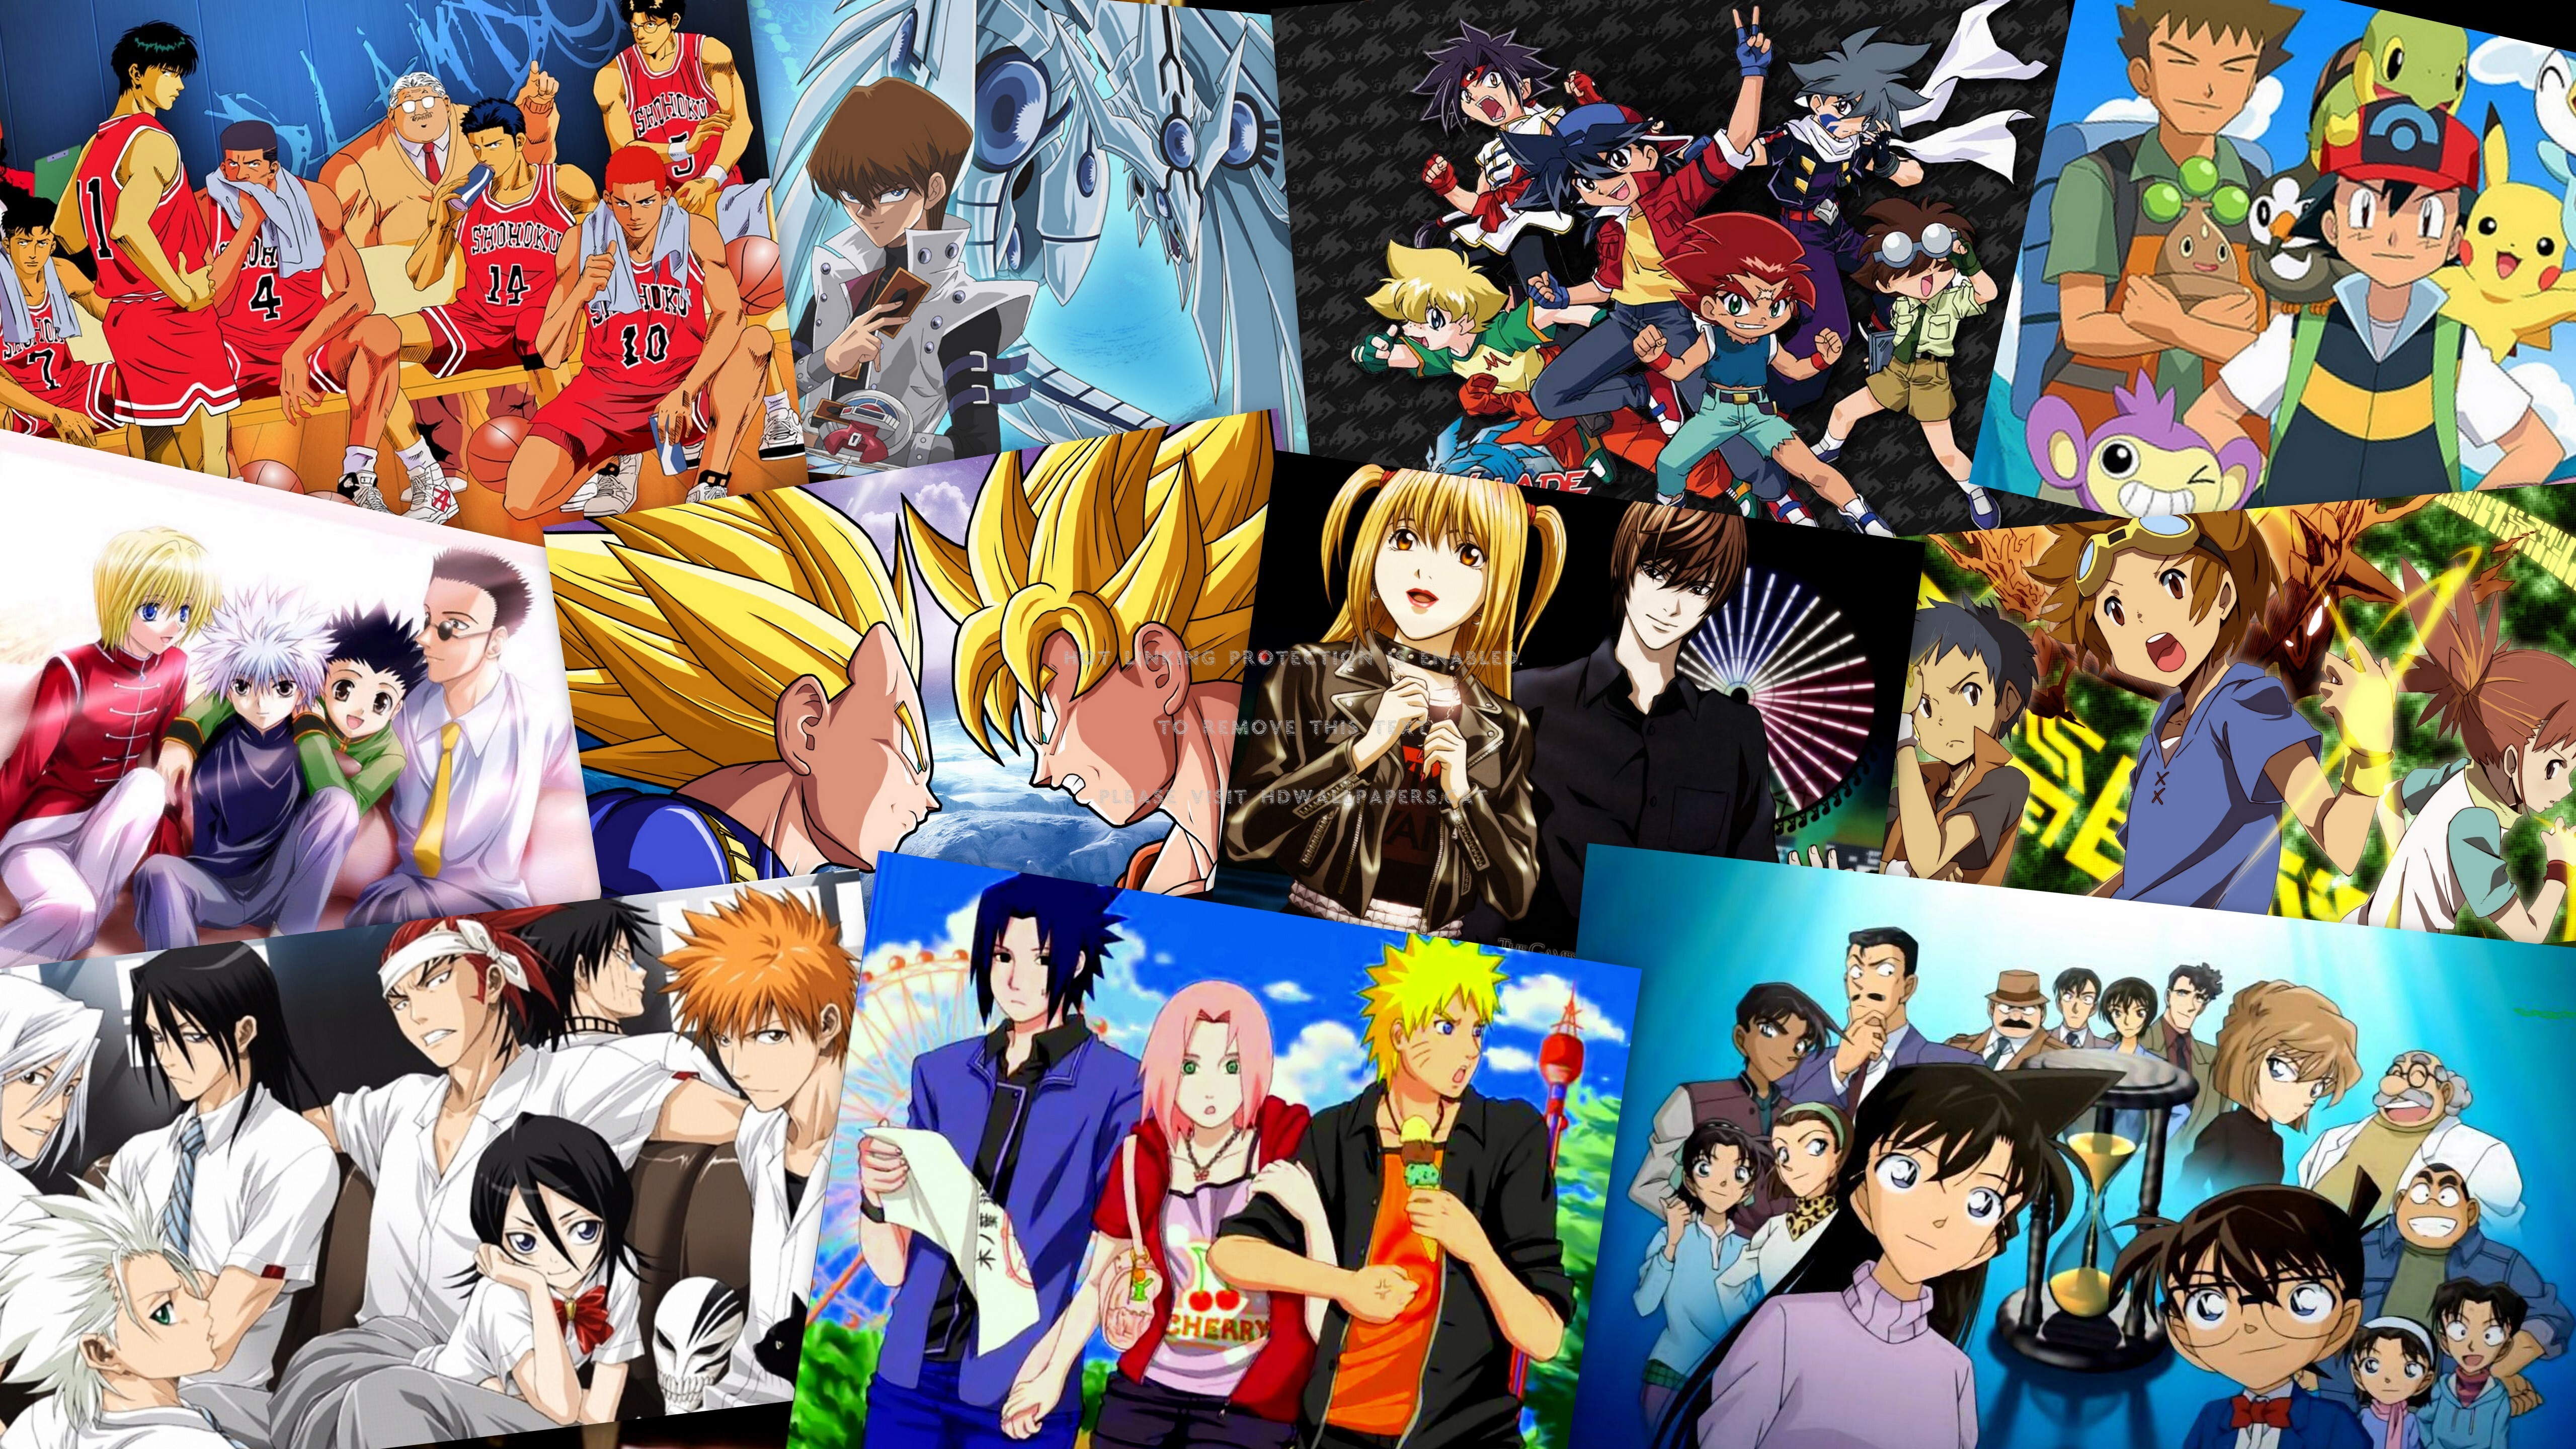 anime collage wallpaper,collage,people,art,anime,community